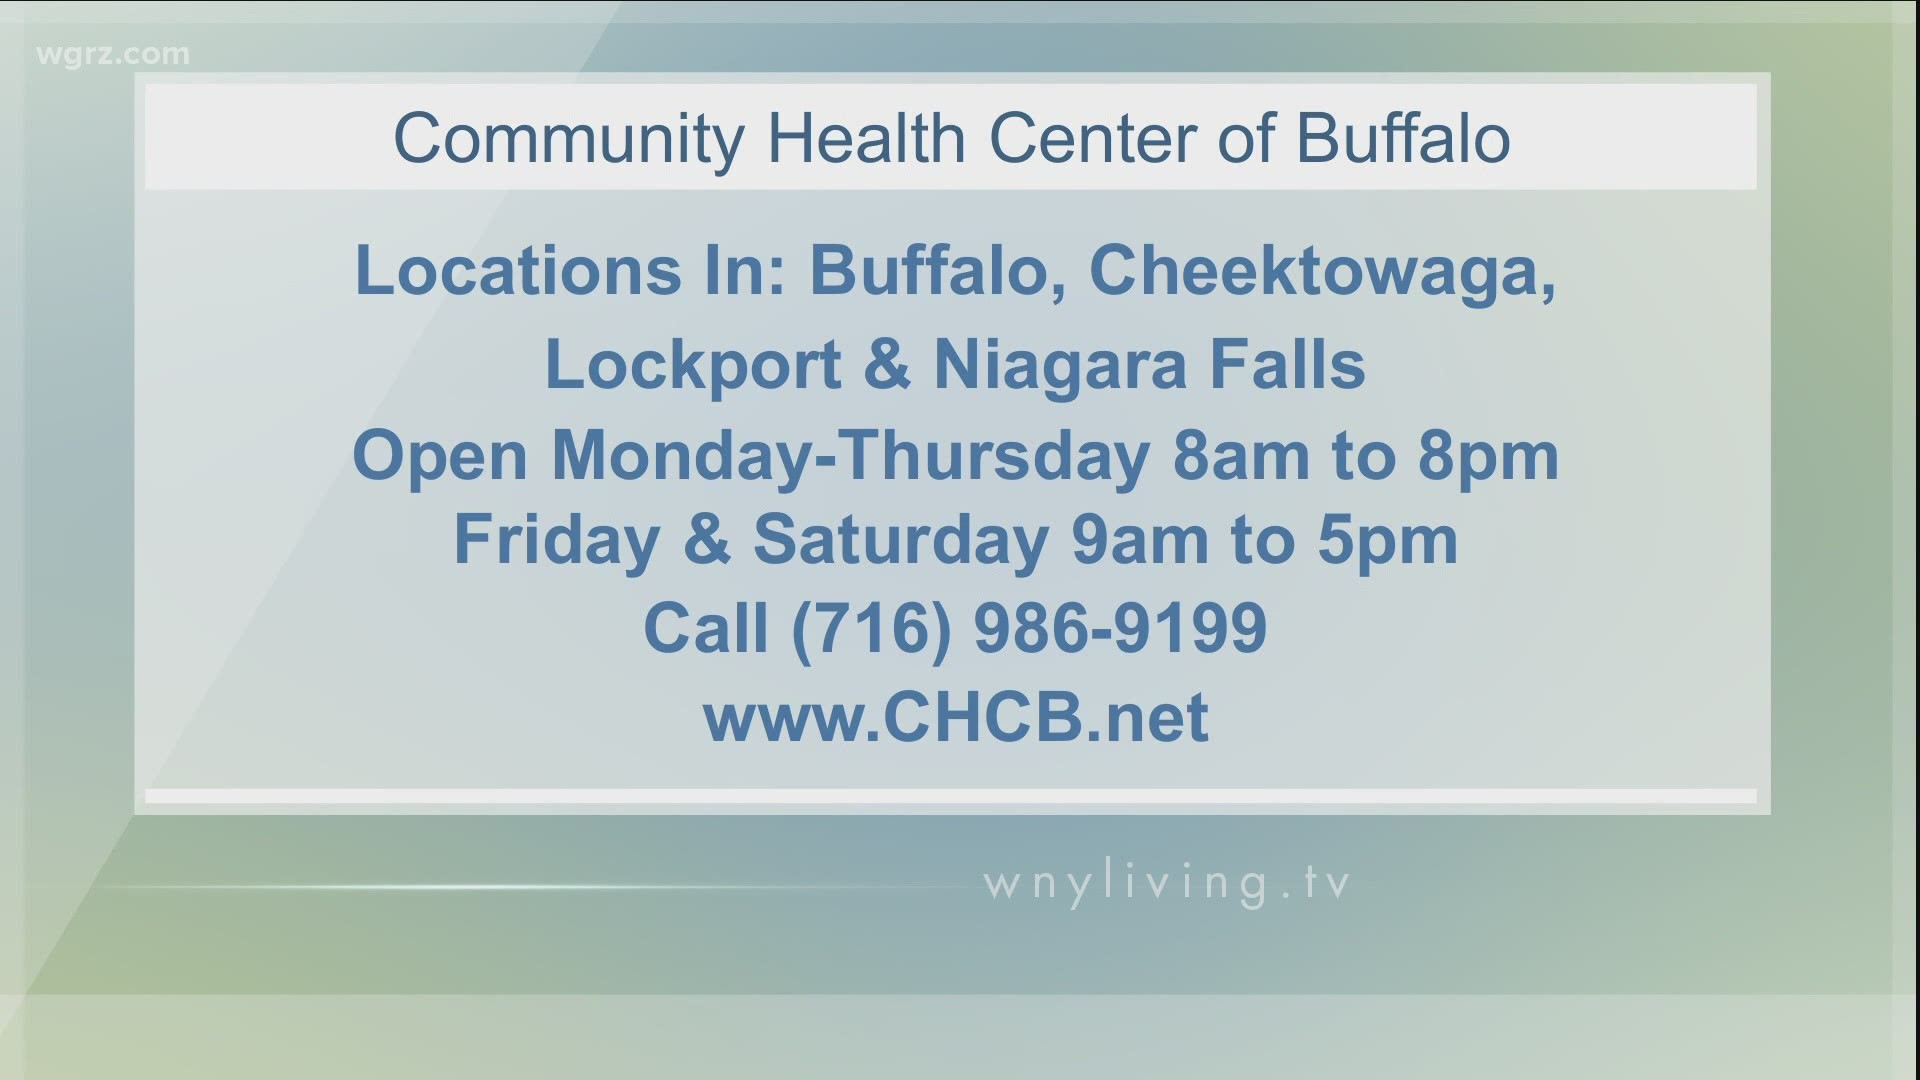 WNY Living - February 20 - Community Health Center of Buffalo (THIS VIDEO IS SPONSORED BY COMMUNITY HEALTH CENTER OF BUFFALO)